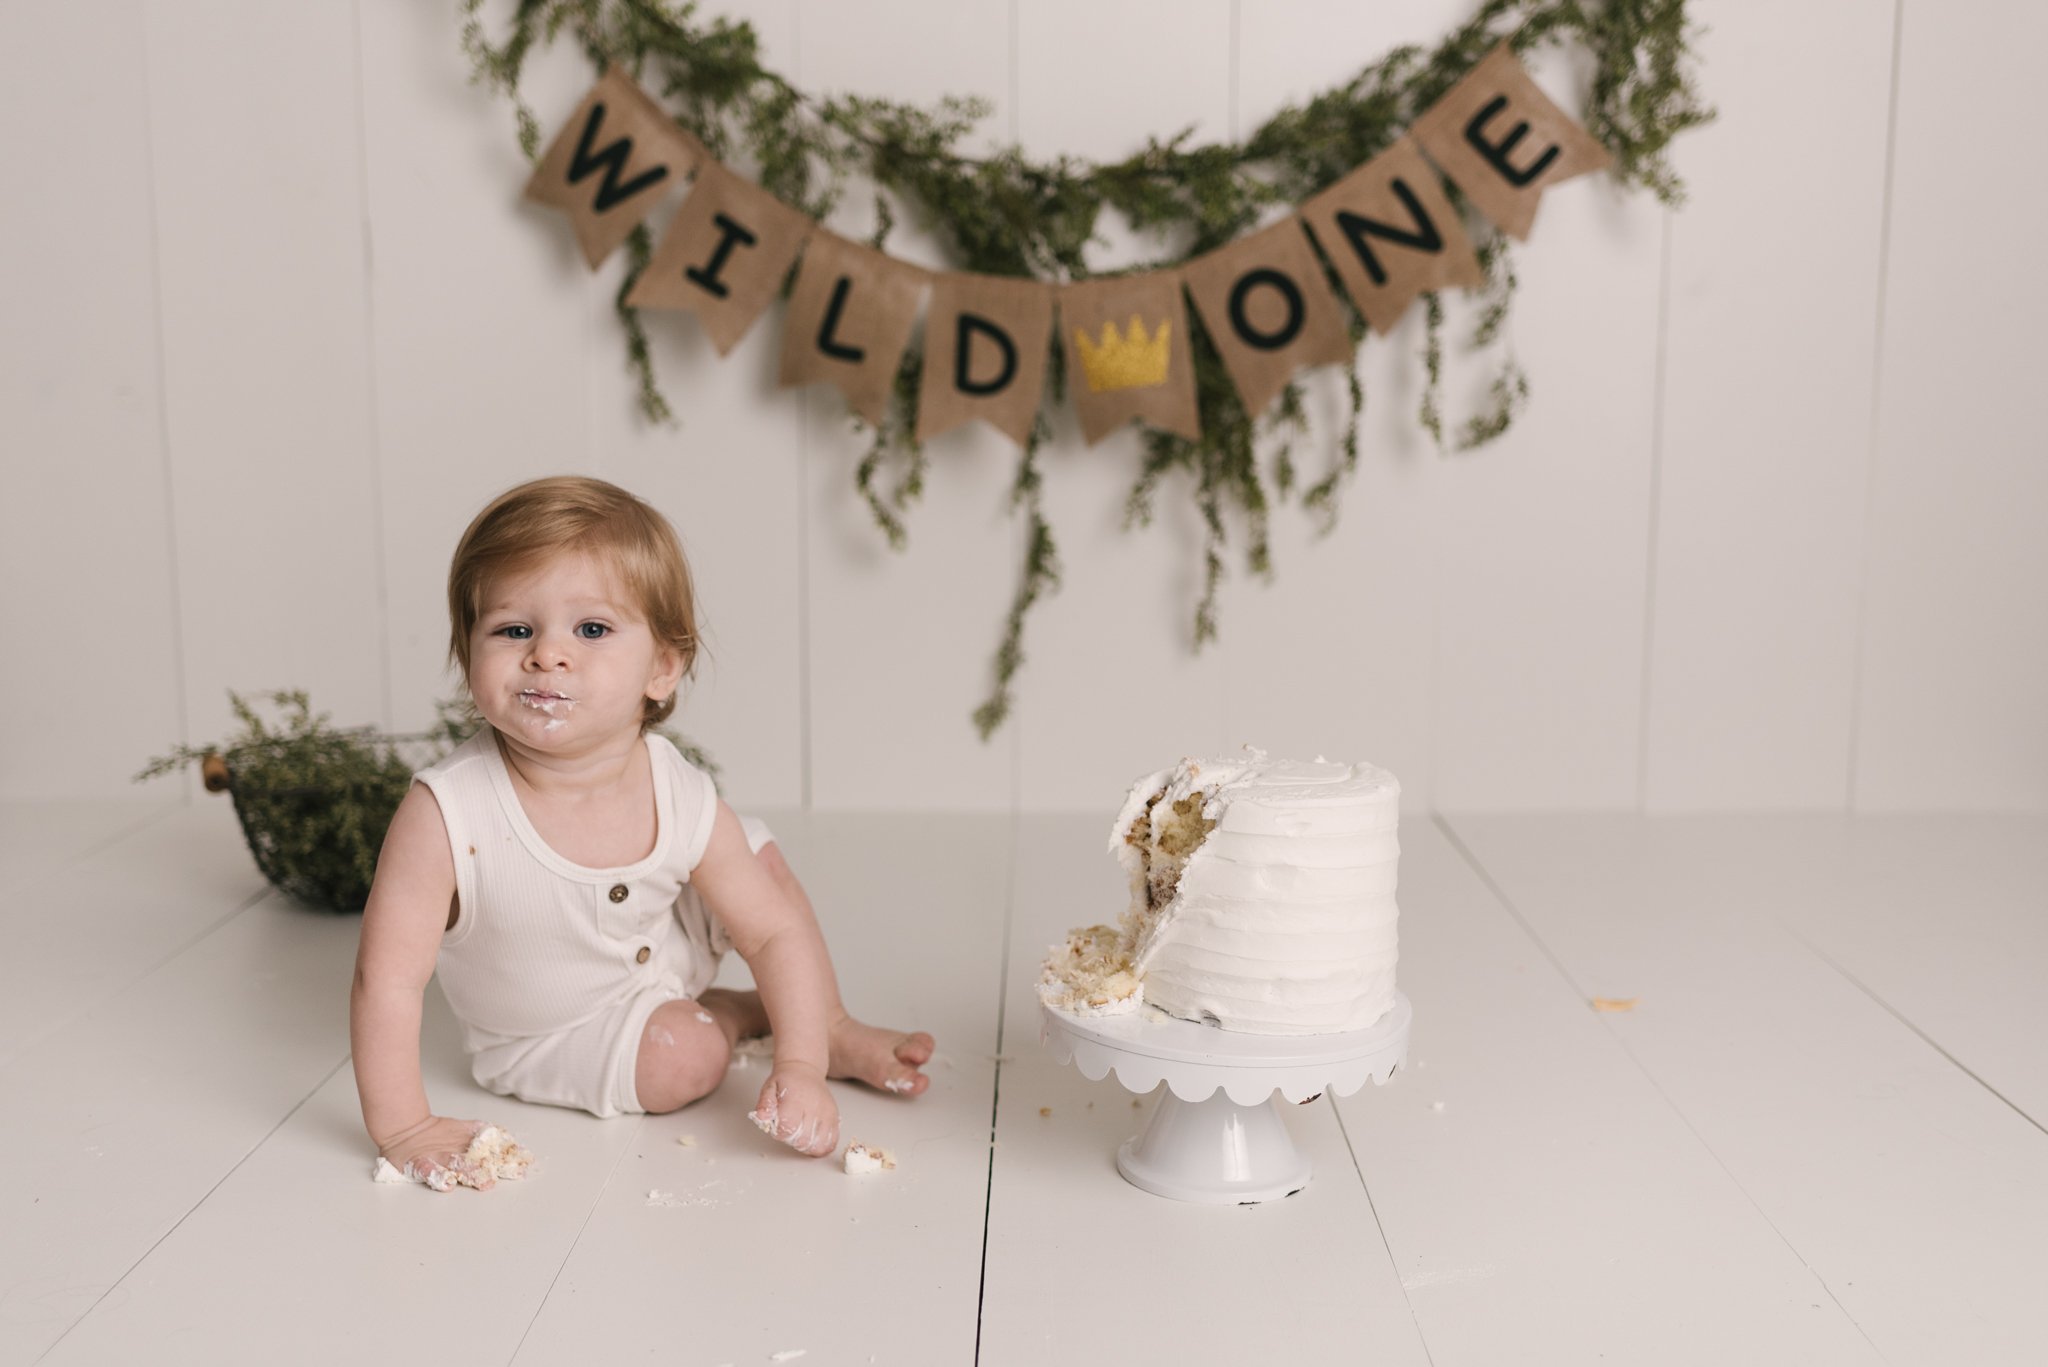 Wild_One_Frist_Birthday_Boy_Smash_and_Splash_Session_Cake_Studio_by_Erika_Child_and_Family_Photographer_for_Christie_Leigh_Photo_in_Youngstown_Ohio_OH_Mahoning_County_004.jpg